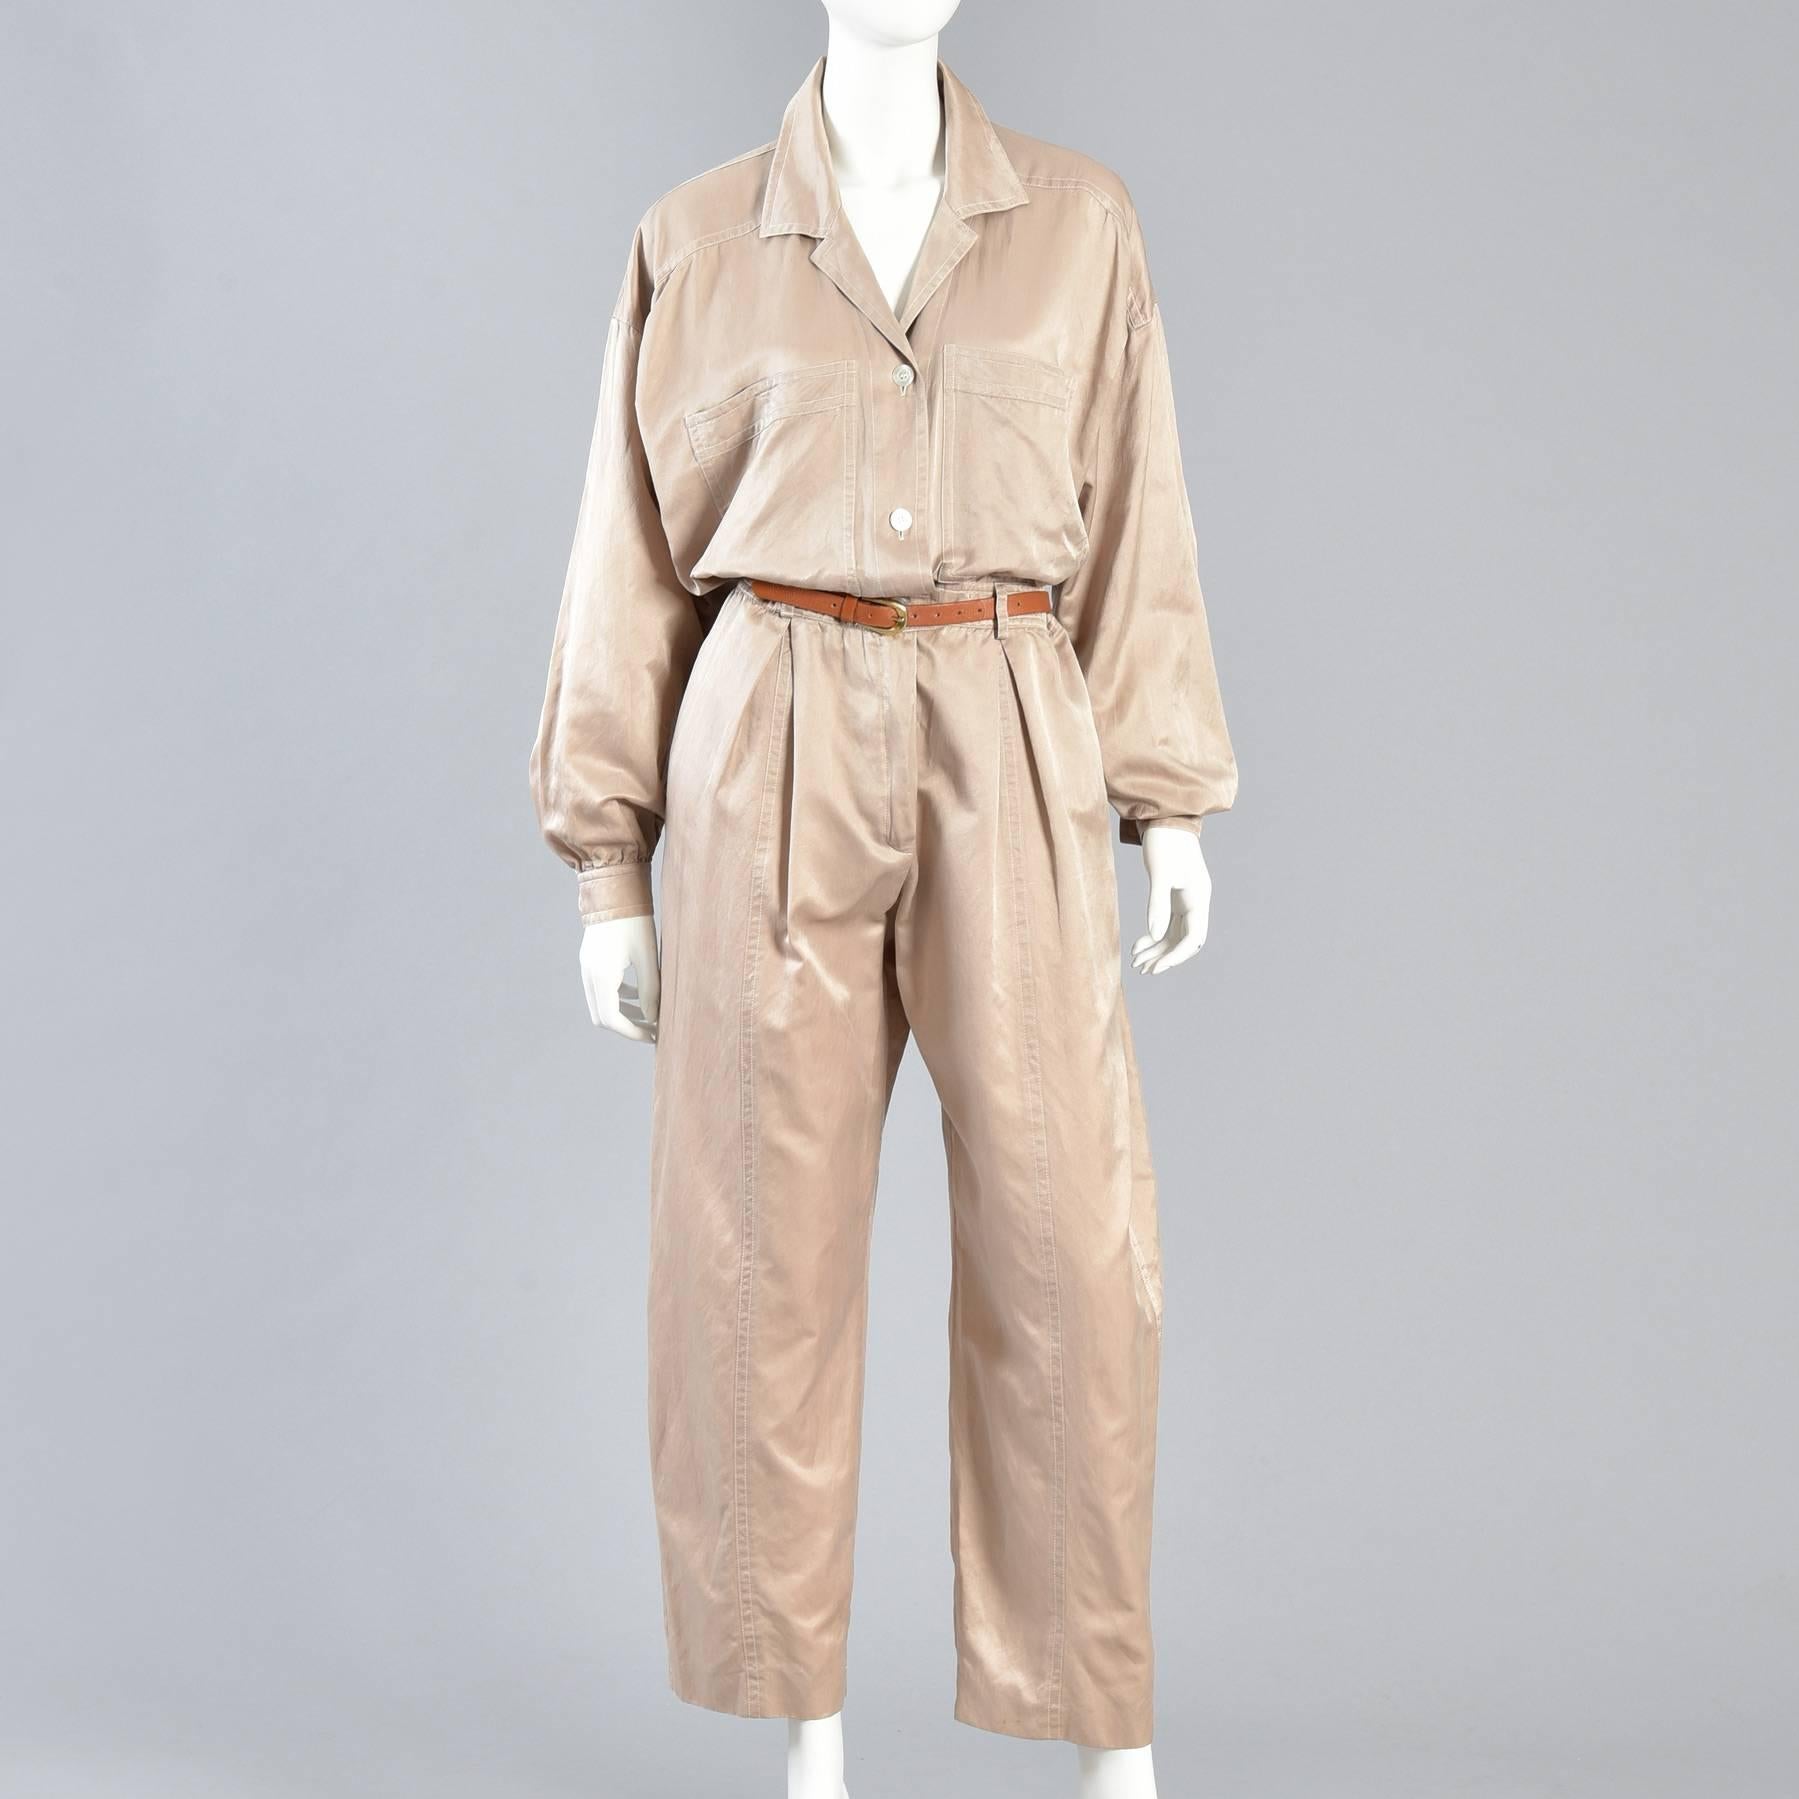 Minimalist Escada Menswear-Look Silk Jumpsuit

Killer vintage 1980s silk & cotton blend Escada slouchy fitting flight suit. Such a great find! 

Pale champagne colored silky soft body in the most comfortable slouchy fit imaginable. Button front